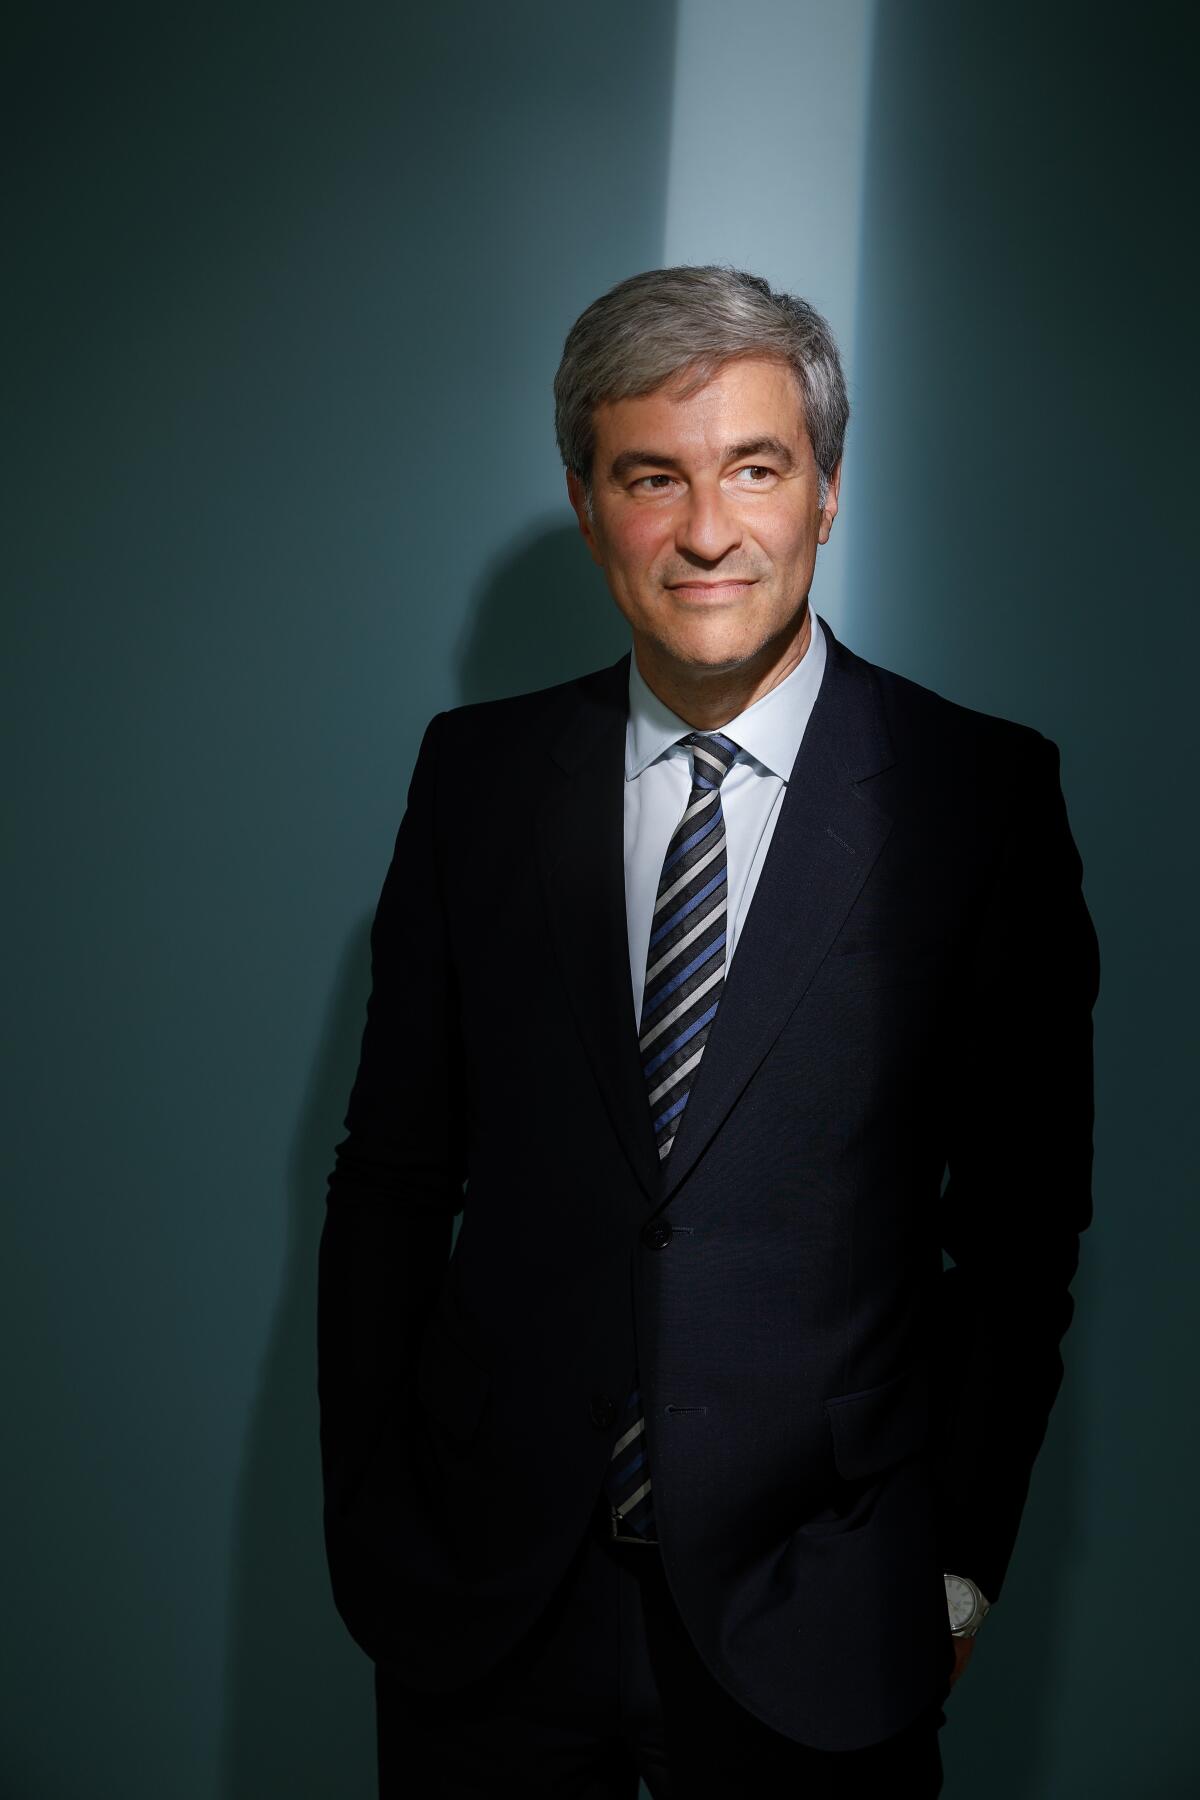 Michael Govan, with gray hair, wearing a dark suit and tie, stands in front of a blue backdrop and looks to the side. 